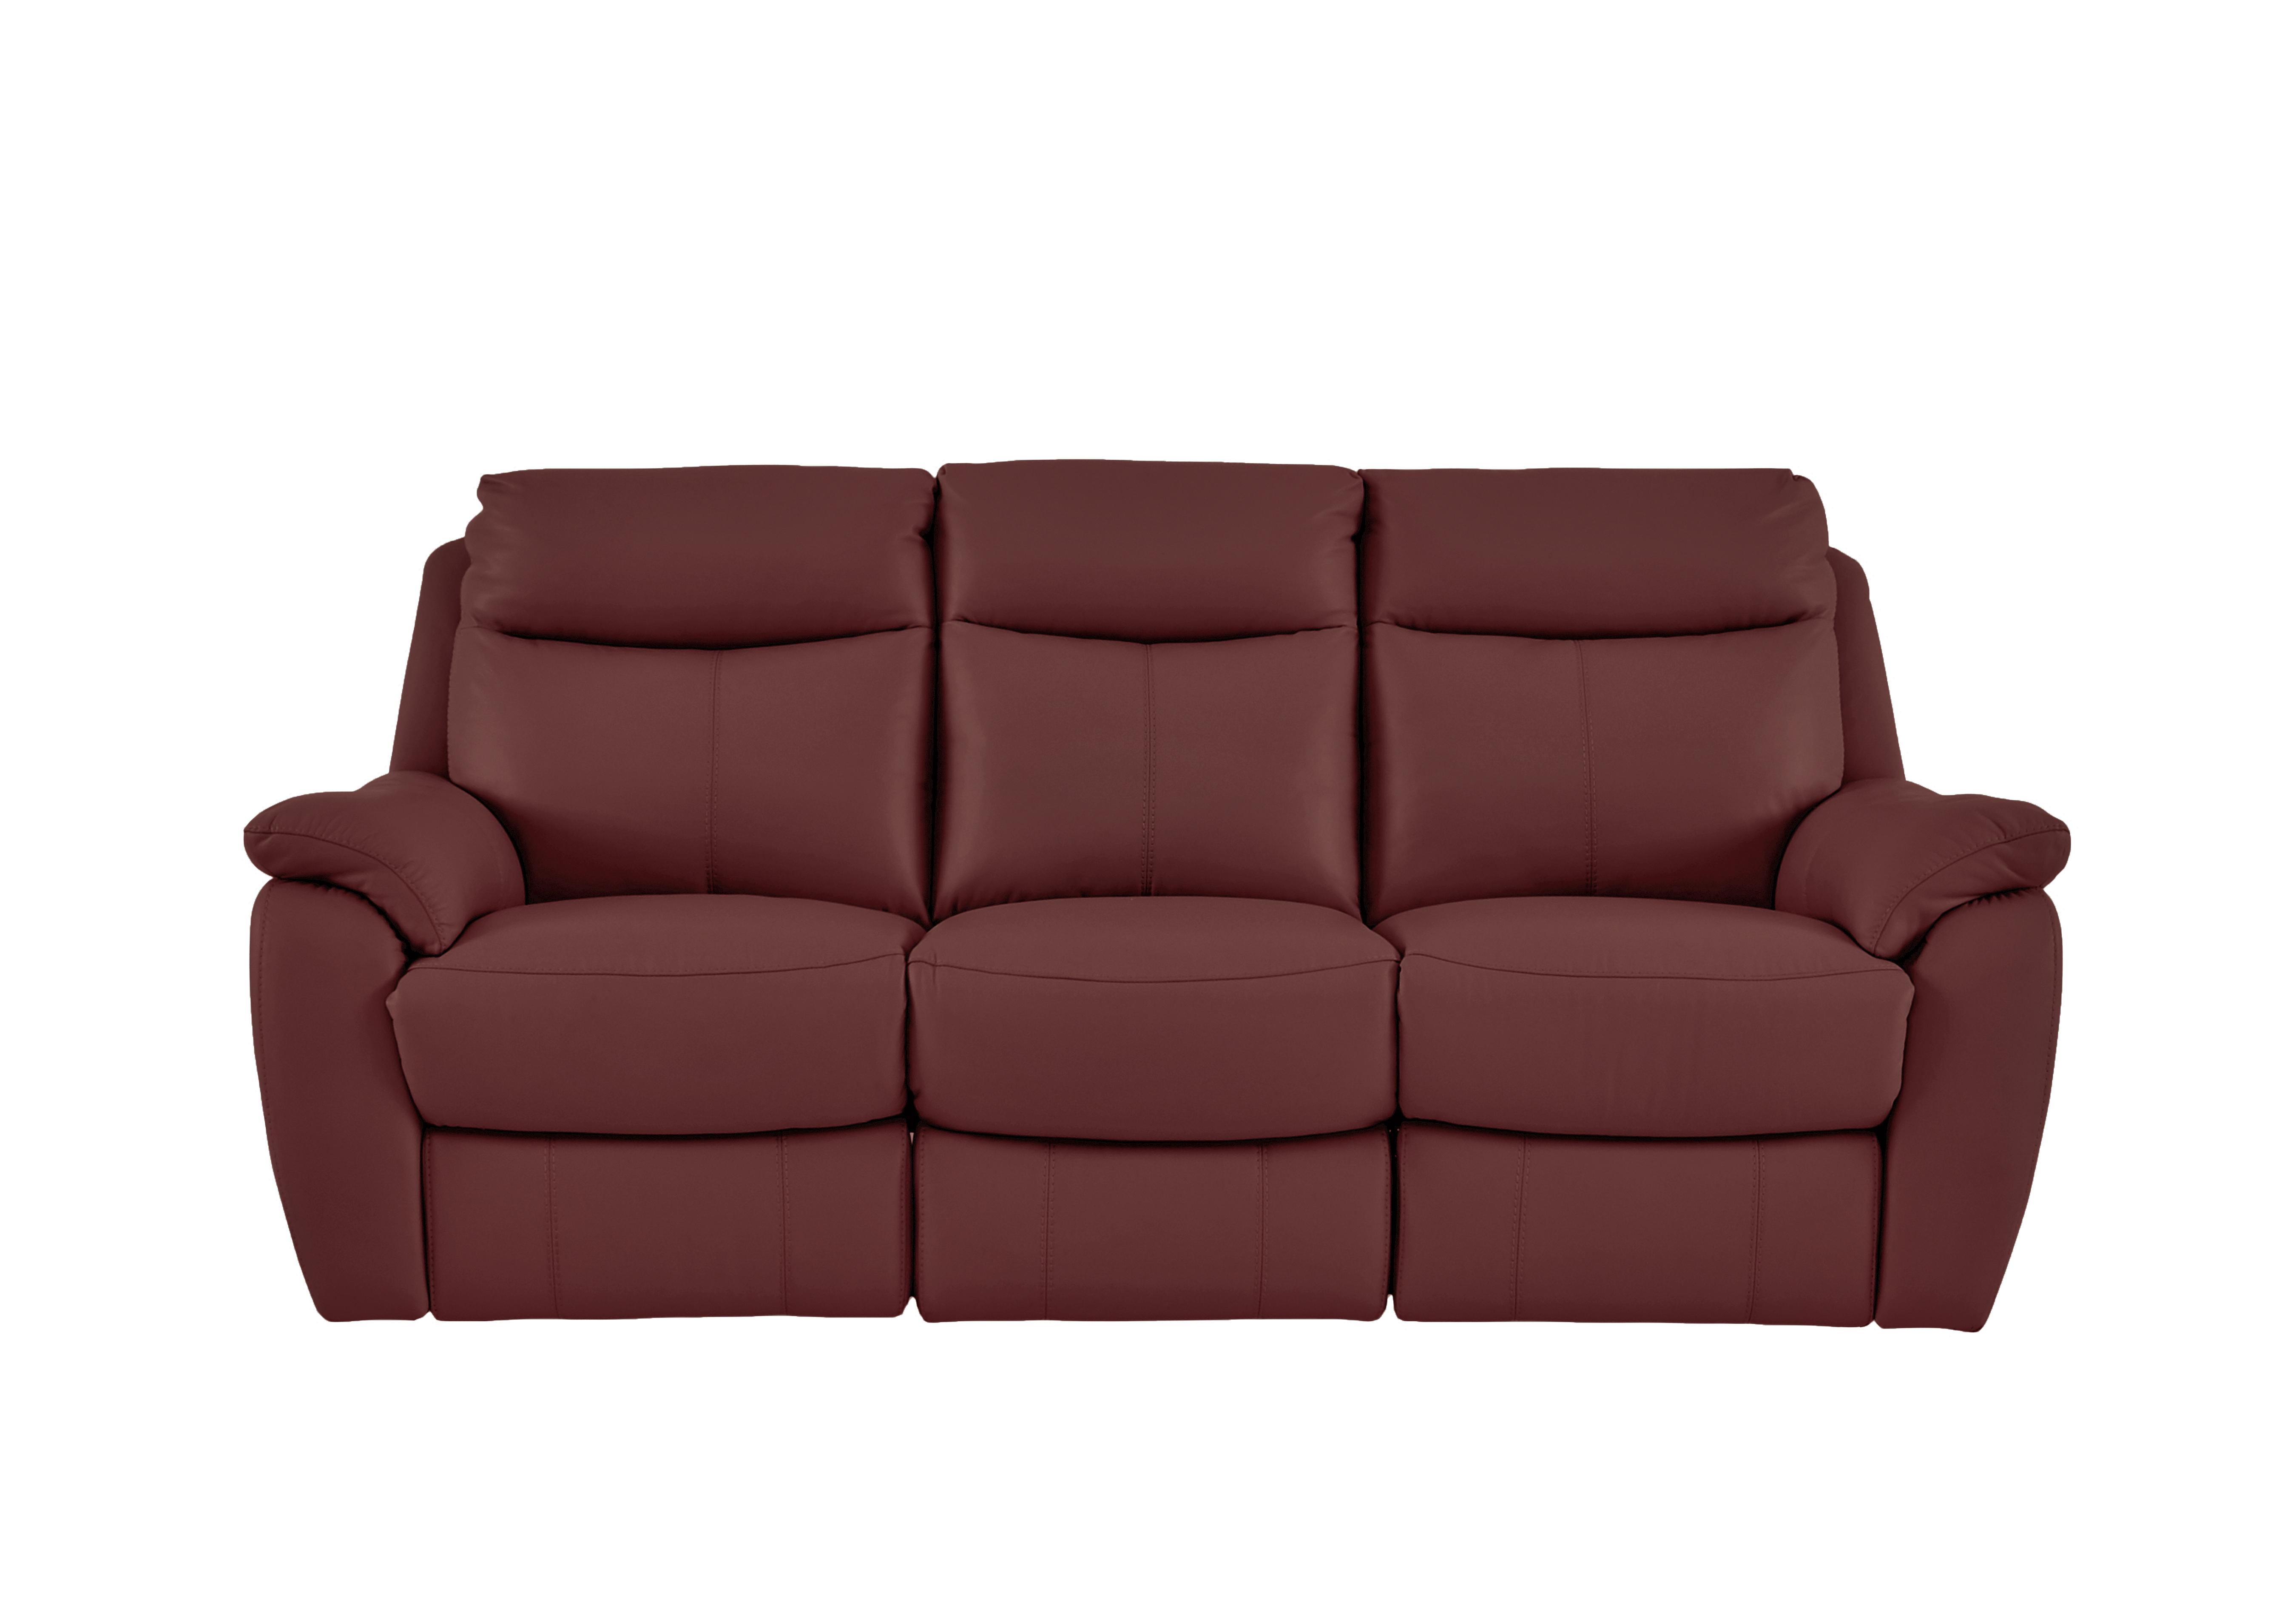 Snug 3 Seater Leather Sofa in Bv-035c Deep Red on Furniture Village